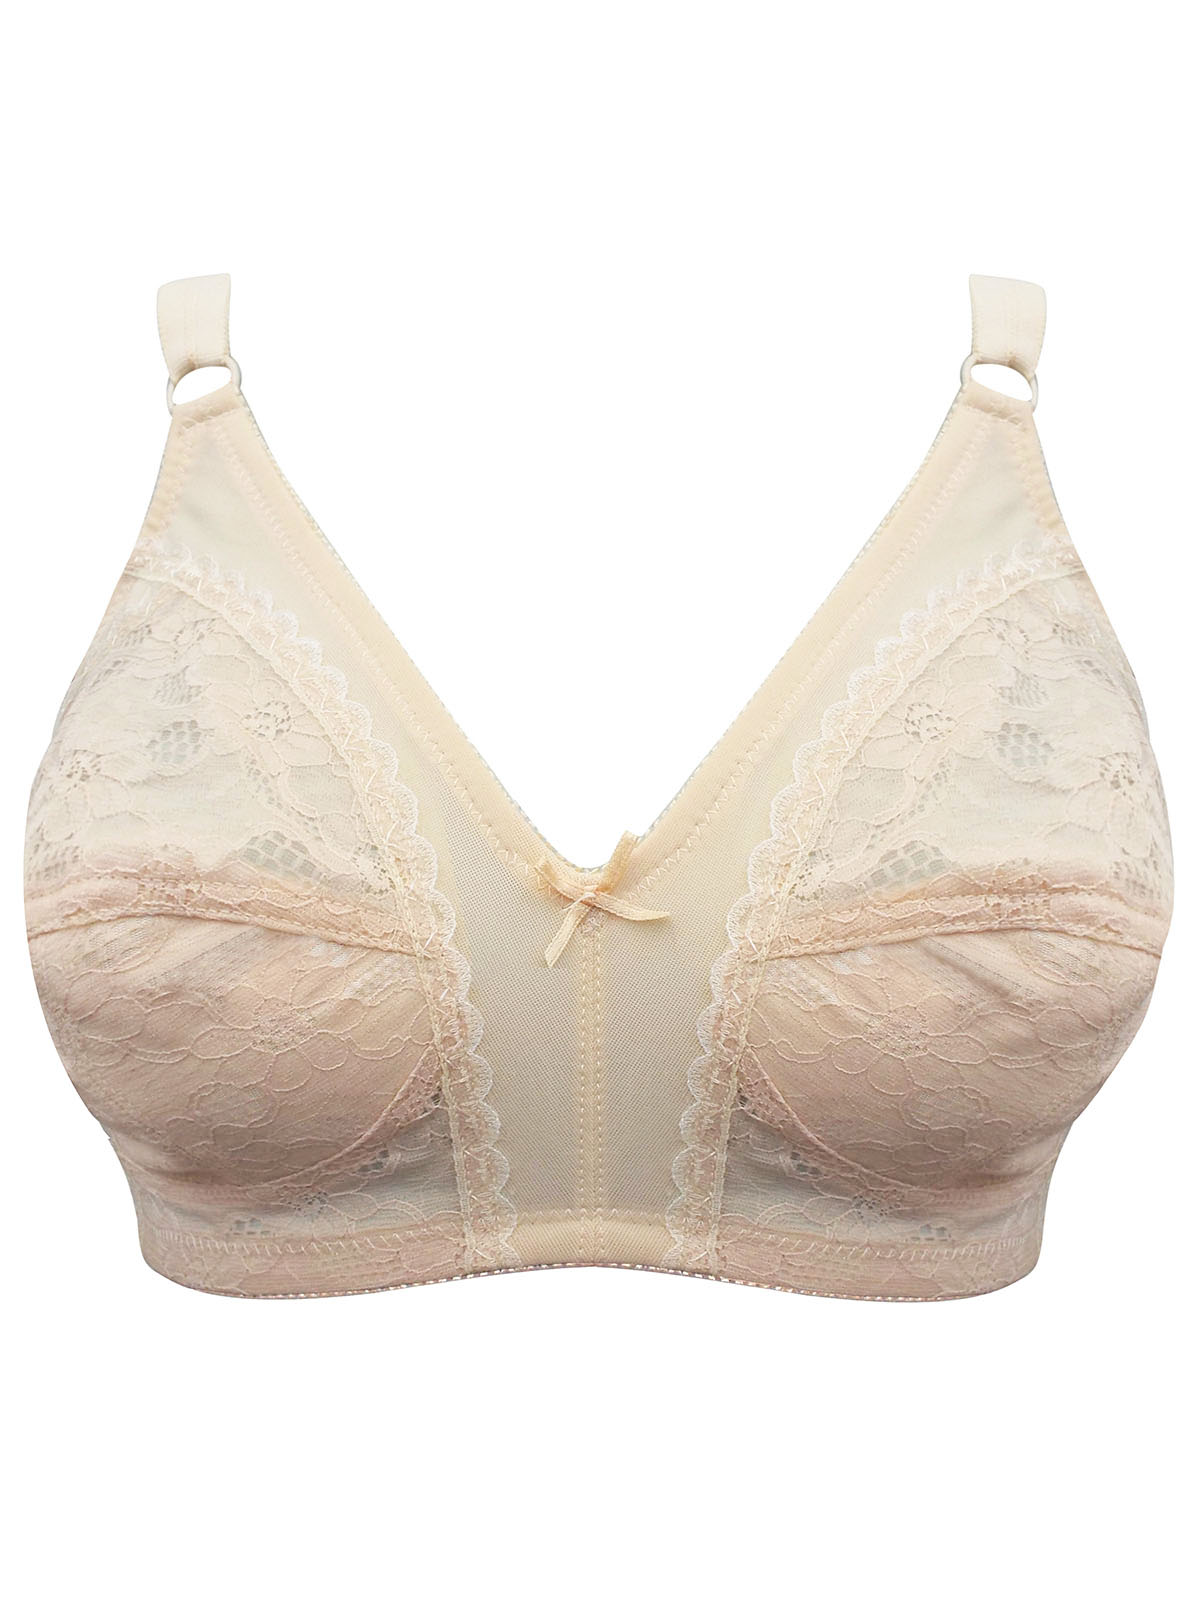 Camille Womens Ladies Jessica Underwired Full Cup Lace White Bra